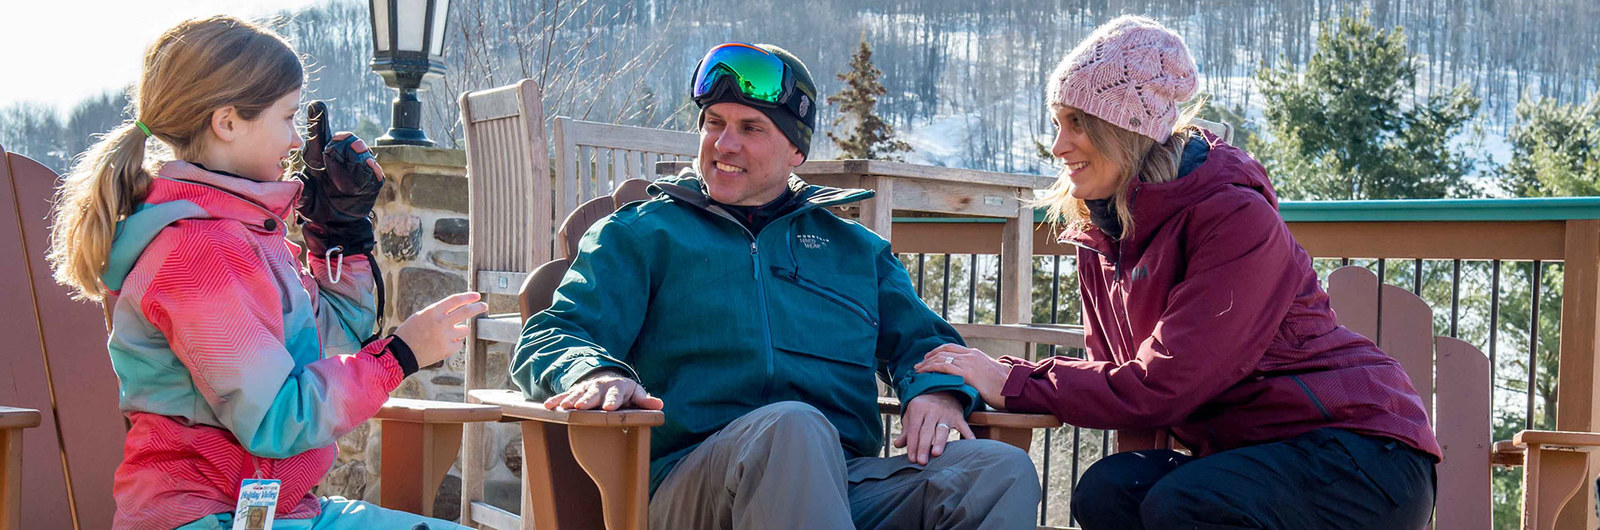 Mom and dad sitting with child outside at ski resort